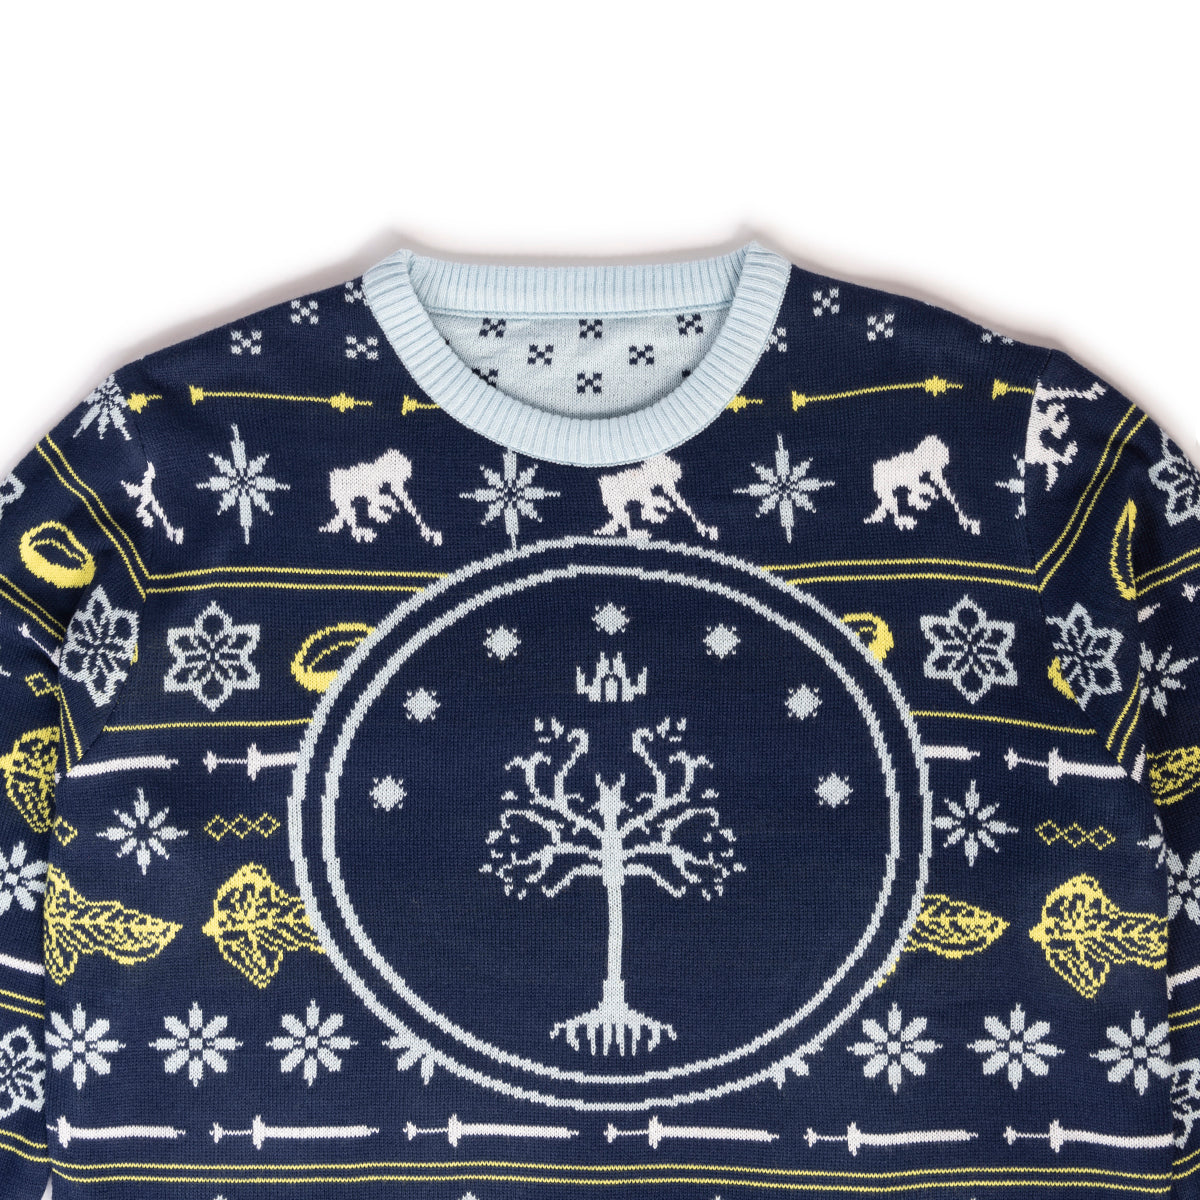 The Lord of the Rings Holiday Sweater